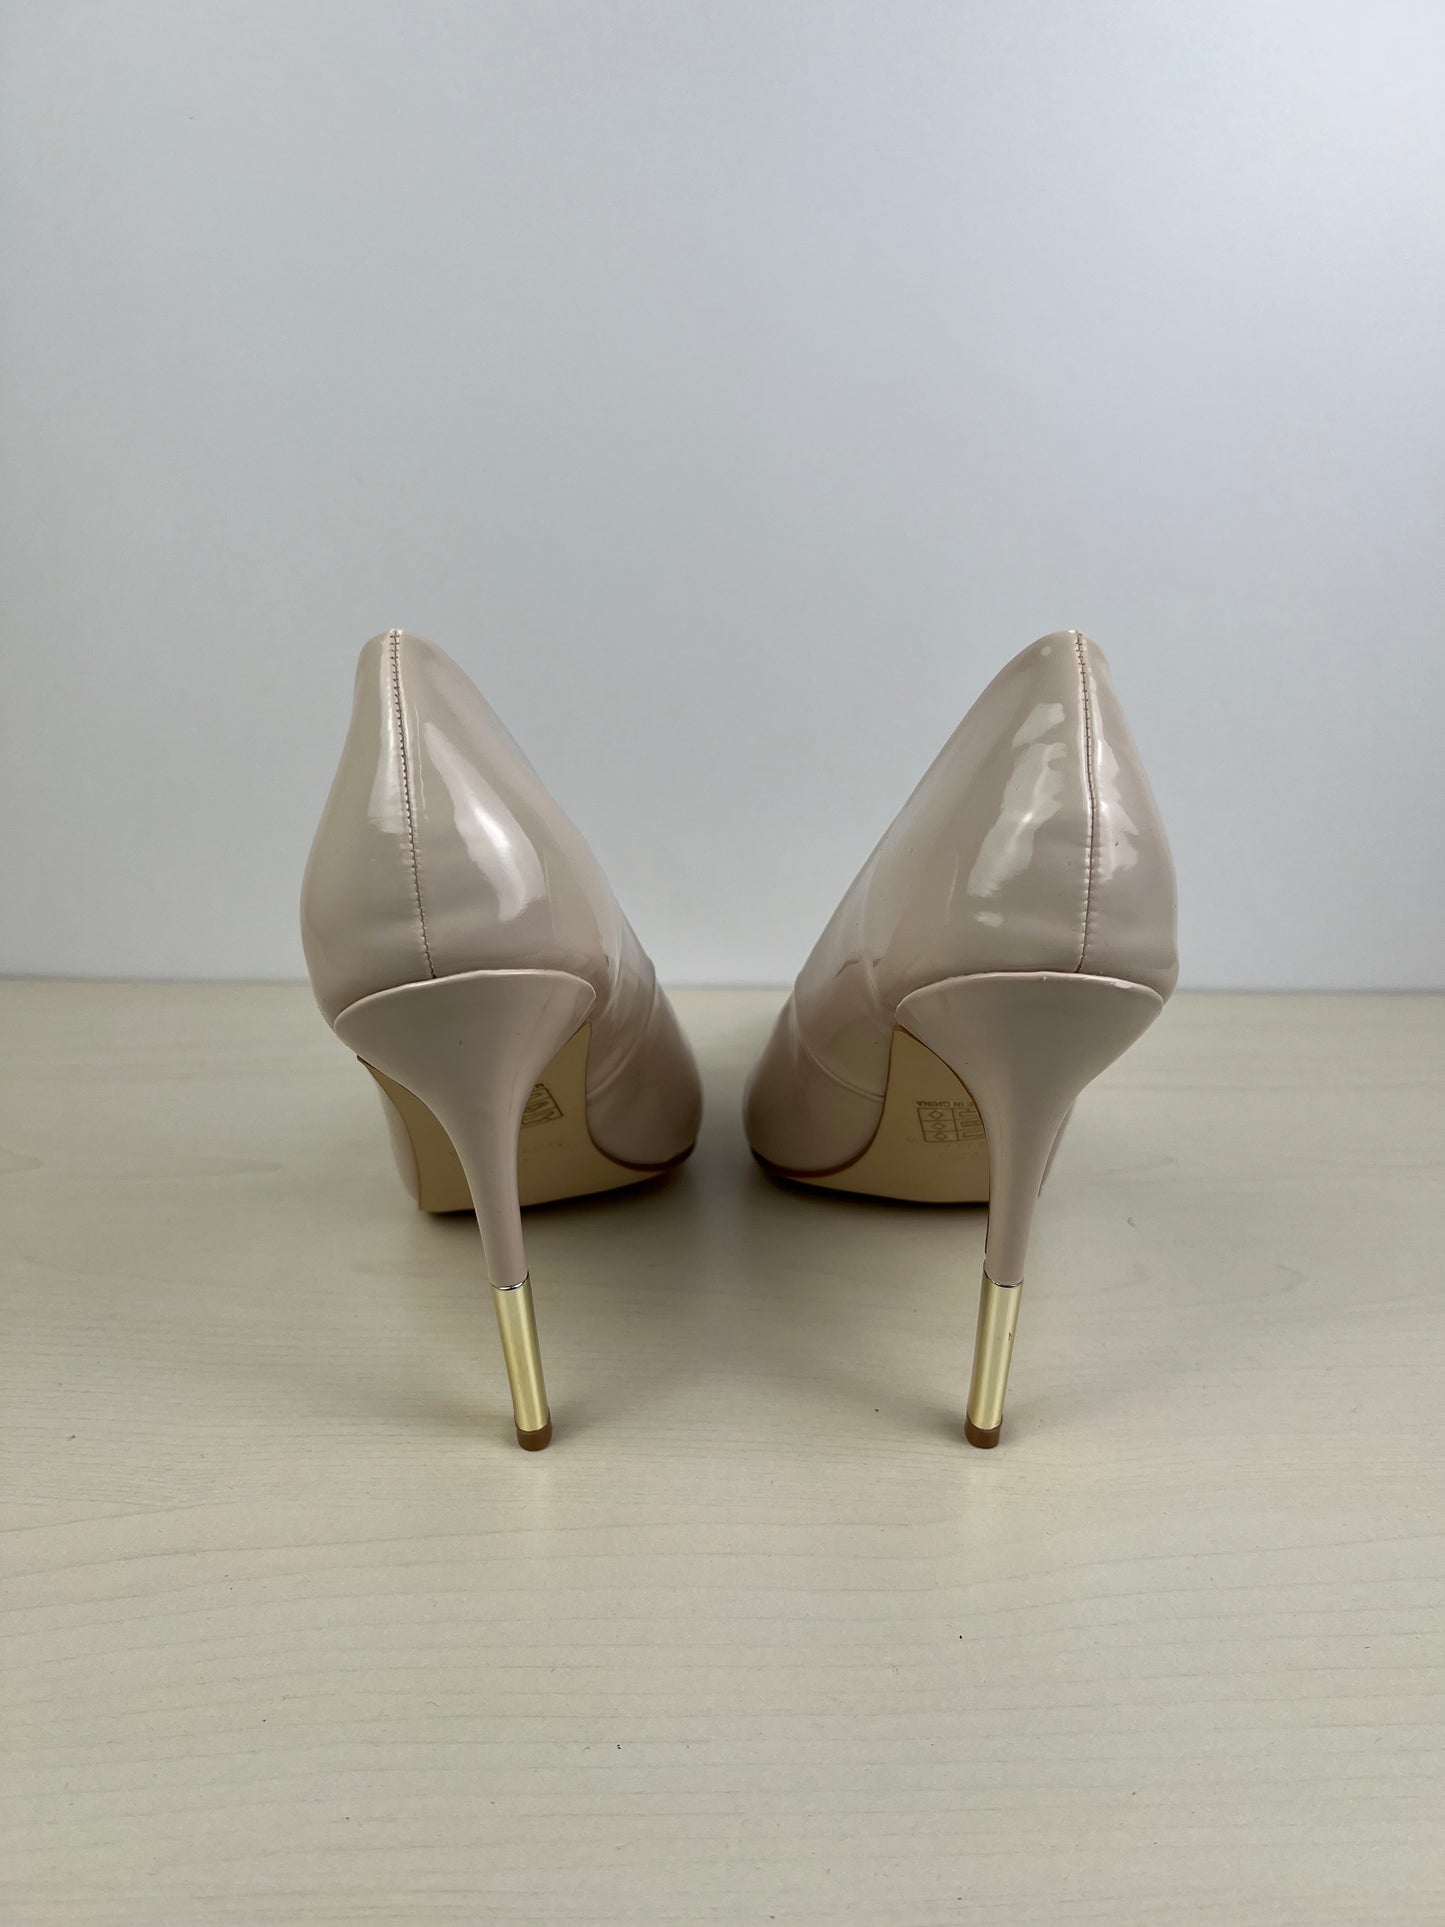 Shoes Heels Stiletto By Bebo  Size: 9.5